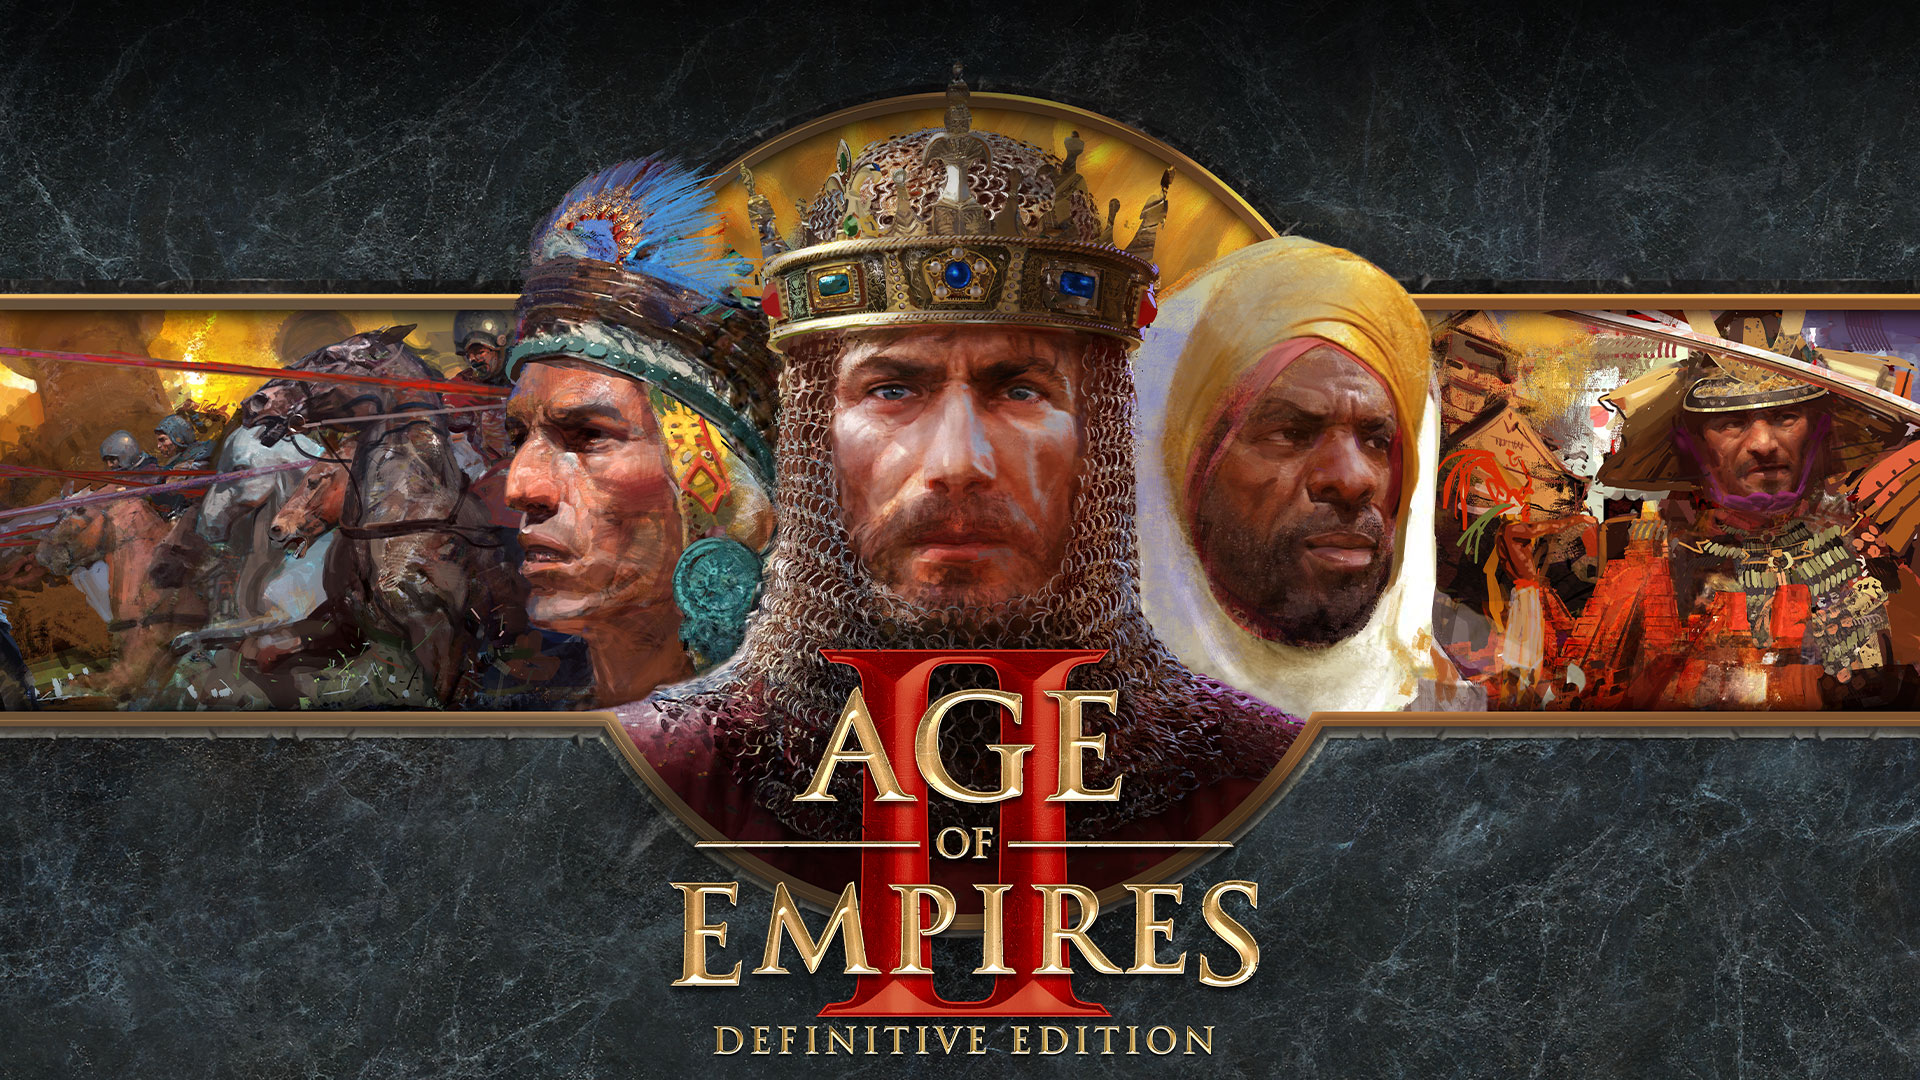 Video For X019: Age of Empires IV, World’s Edge, Age of Empires II: Definitive Edition Out Now